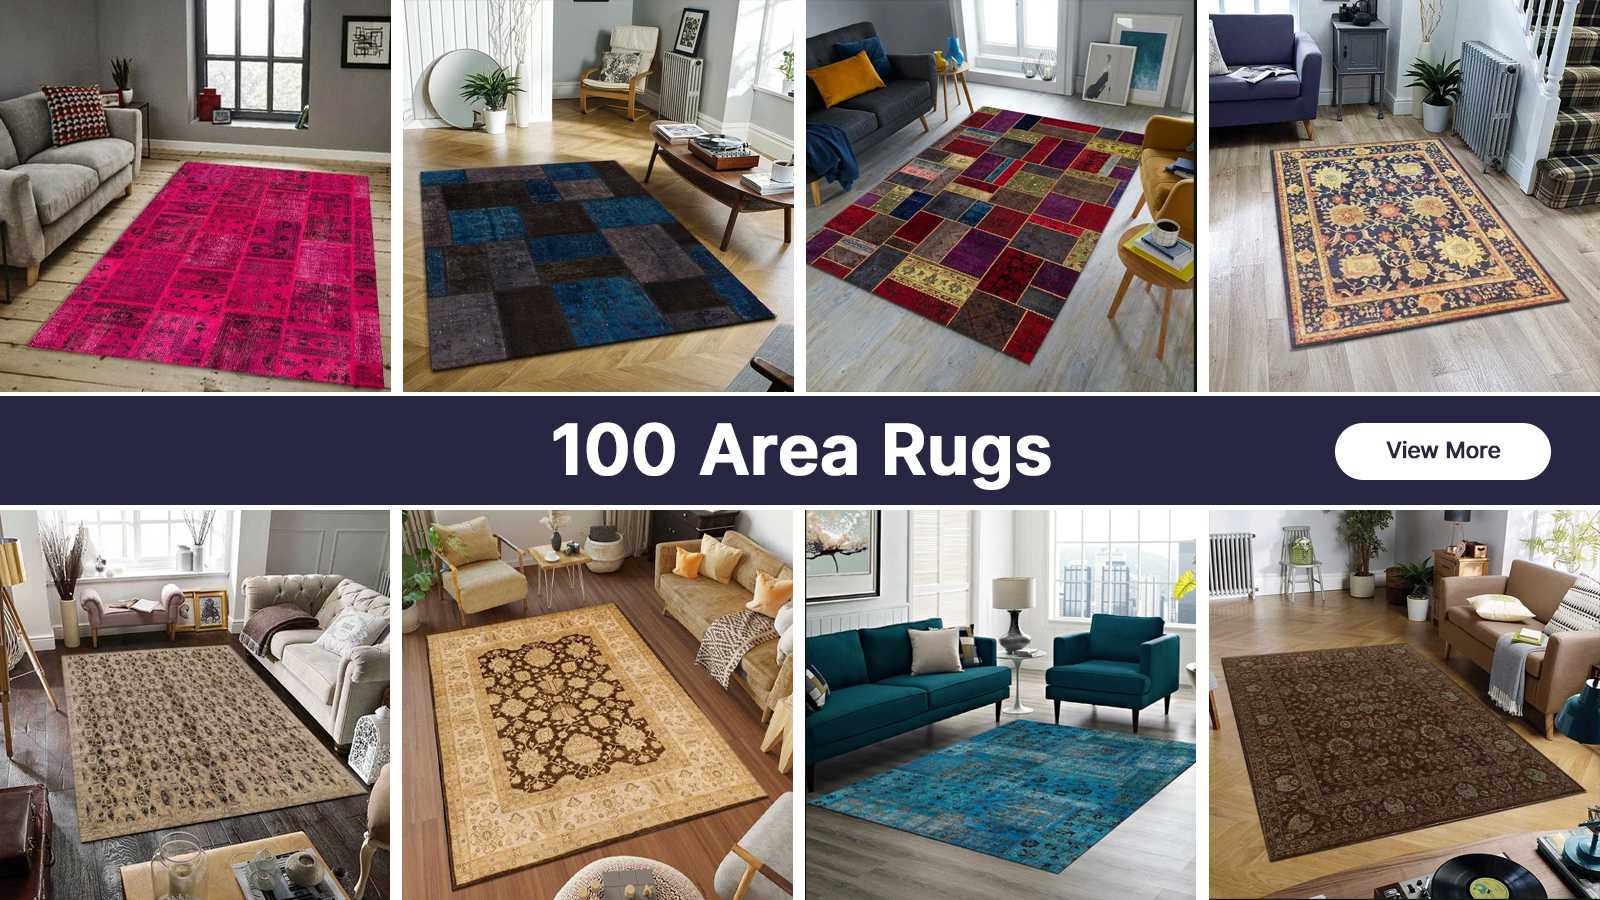 Find the Perfect Round Rug for Your Home: Round Rugs & Round